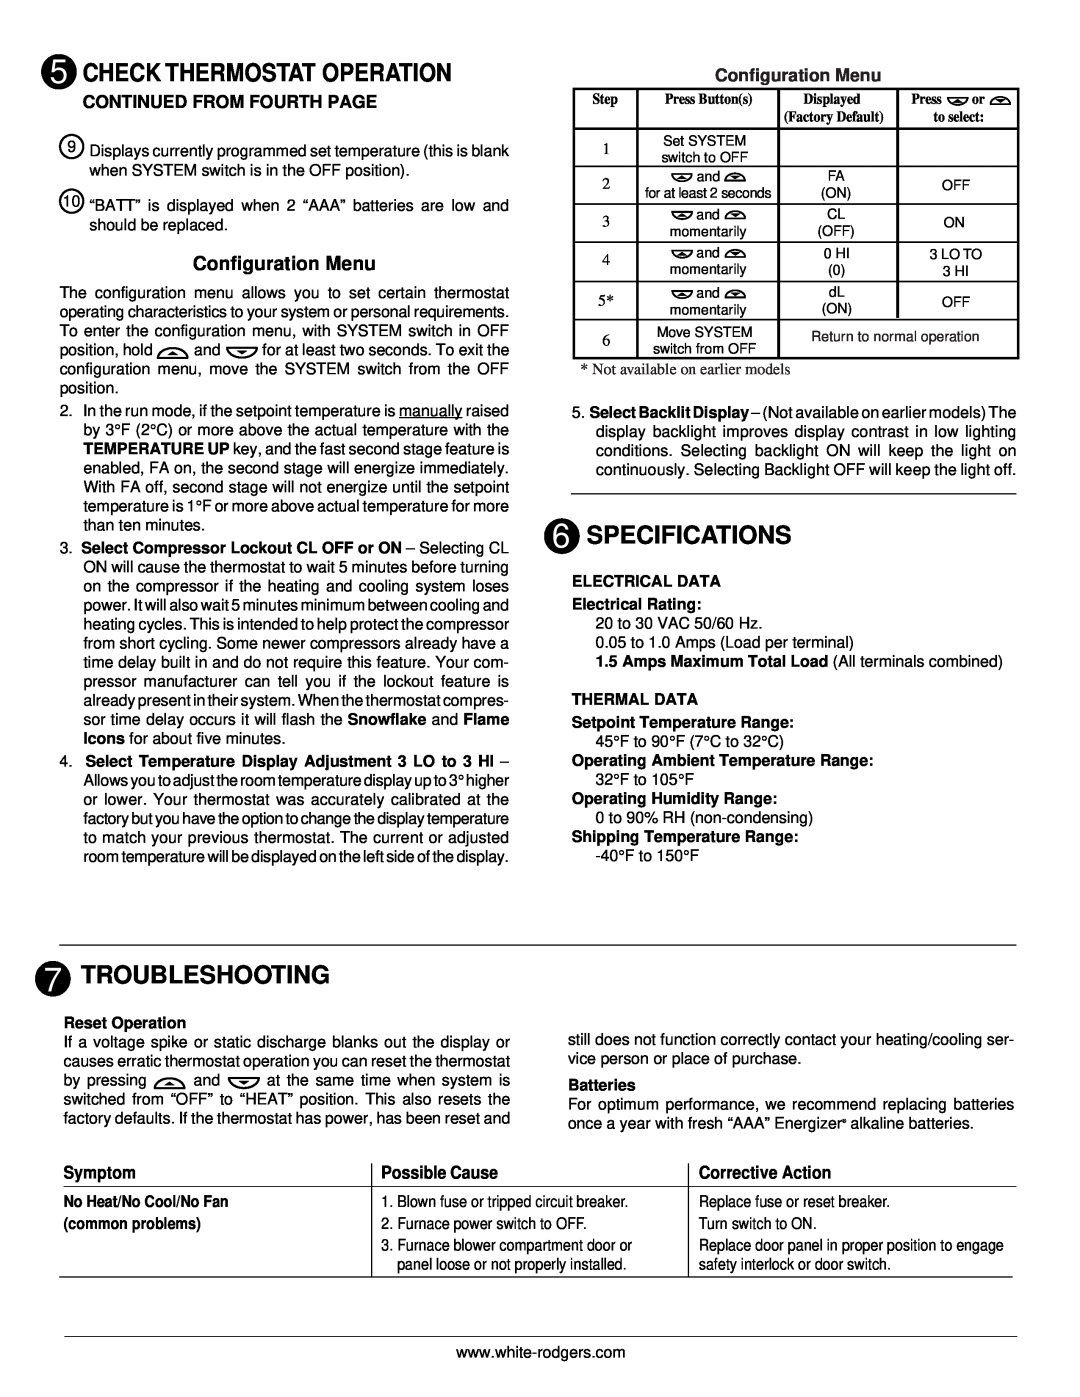 White Rodgers 500 Specifications, Troubleshooting, Configuration Menu, Continued From Fourth Page, Symptom, Possible Cause 